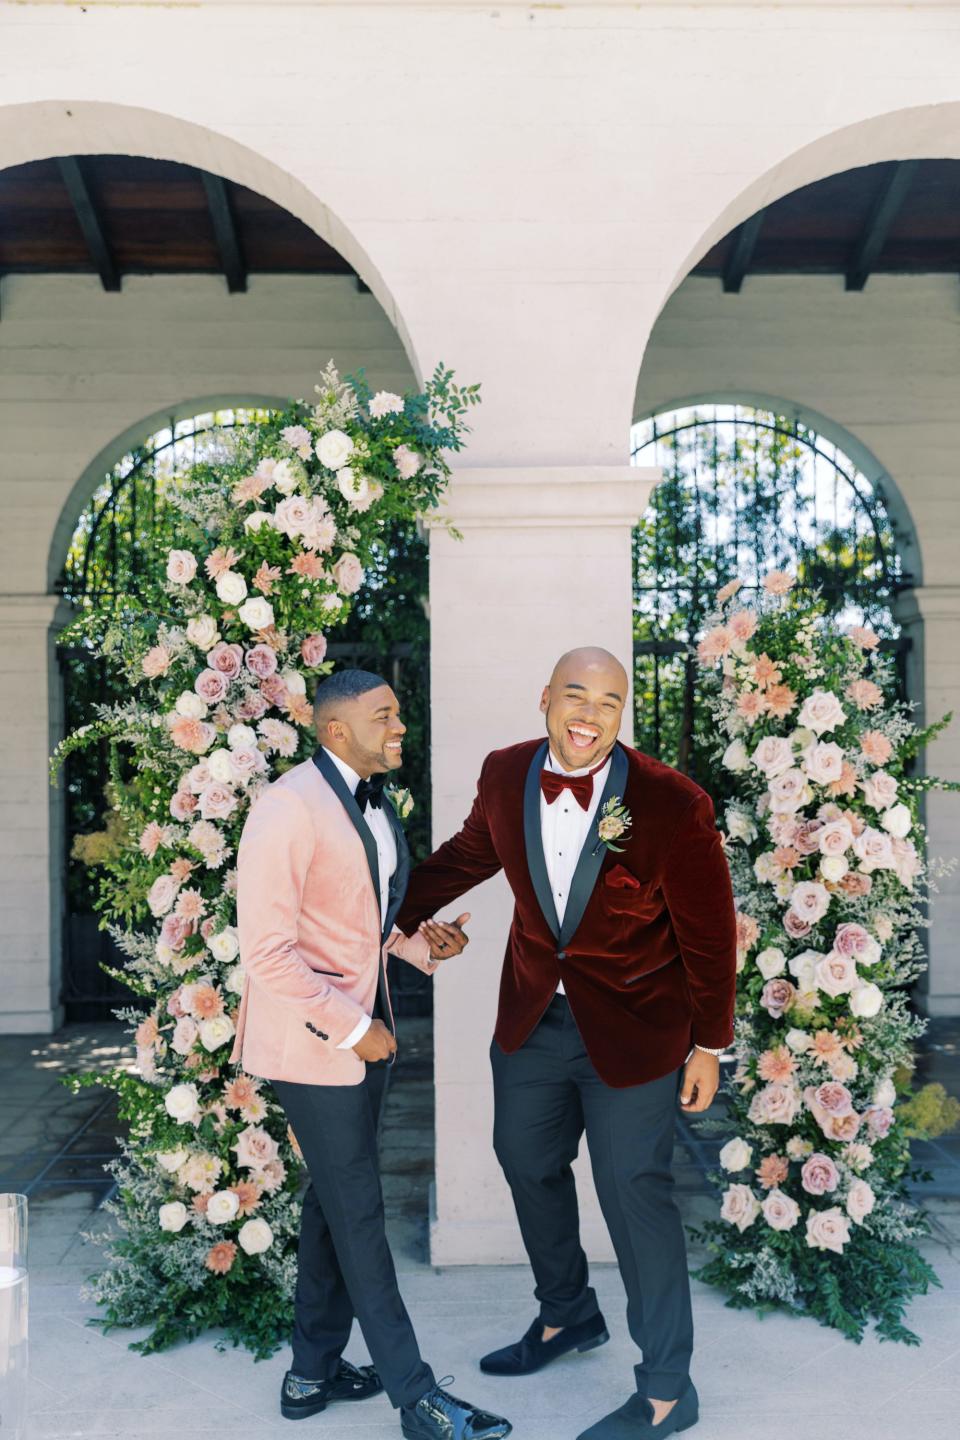 Two grooms wearing brightly colored suits laugh in front of flowers.